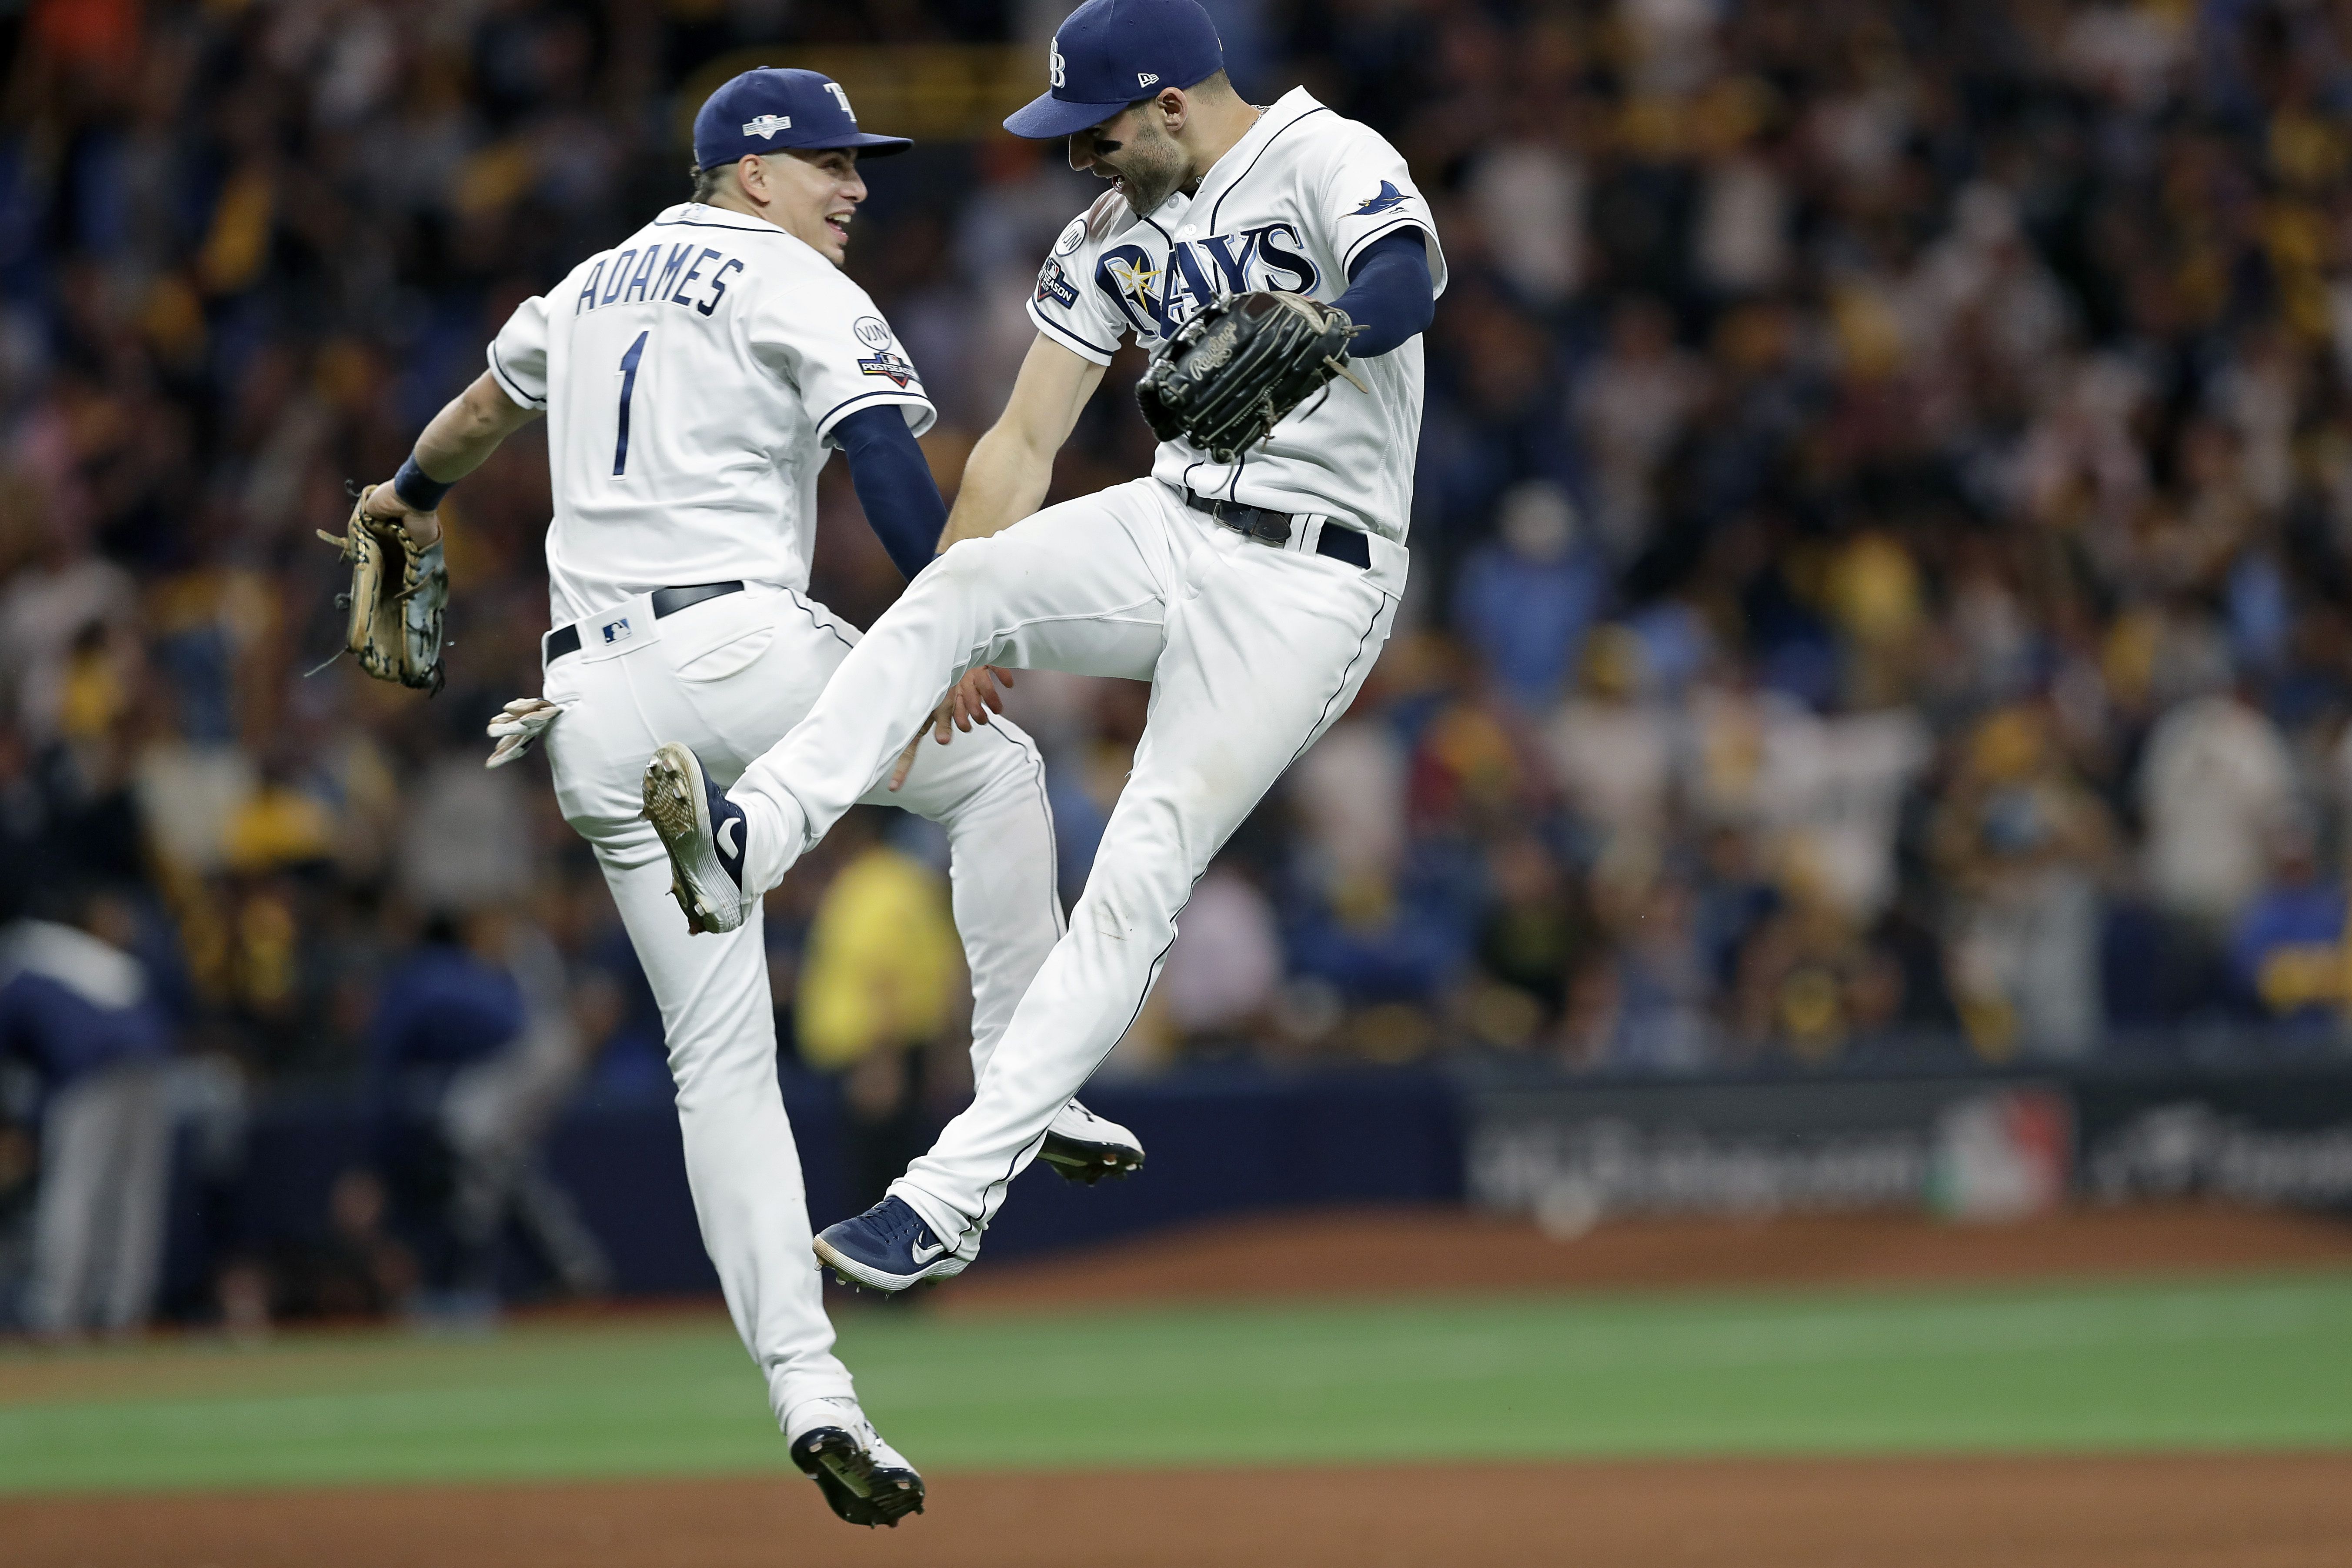 How to Watch the Astros vs. Rays Game: Streaming & TV Info